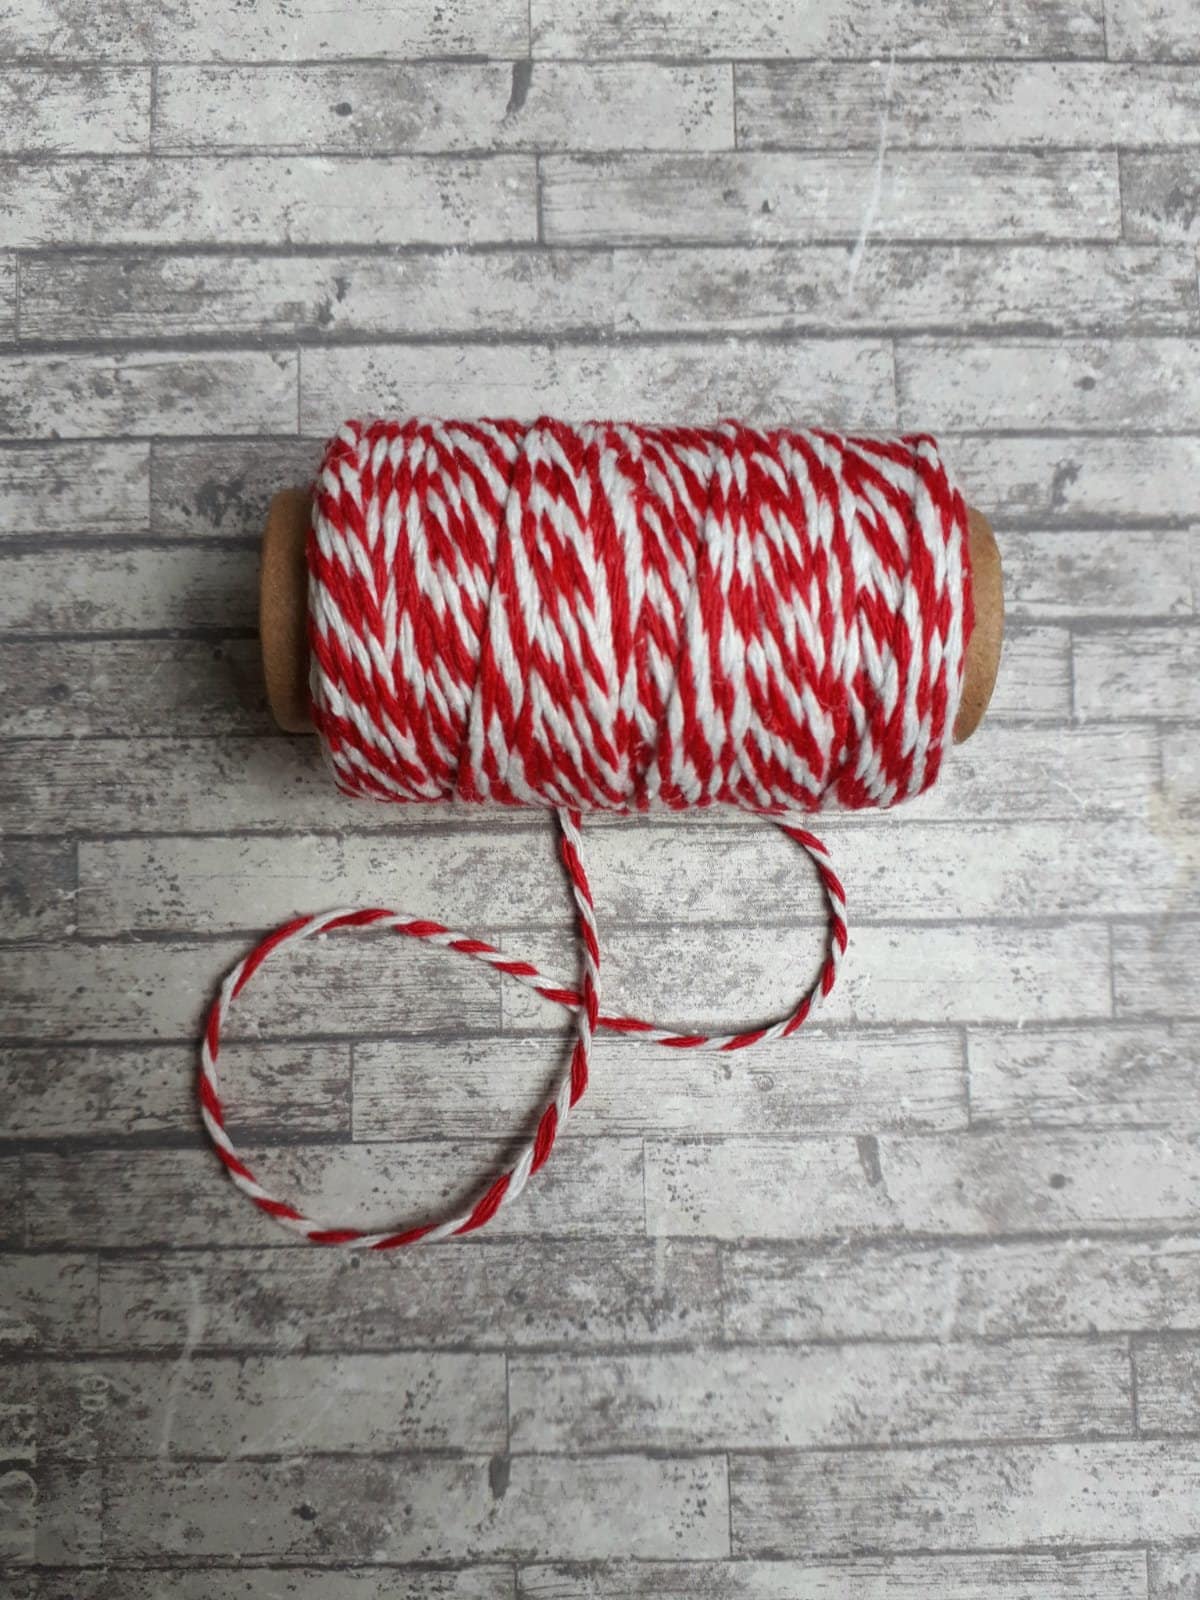 CHRISTMAS BAKERS TWINE WRAP CHUNKY RED GOLD PAPER STRING XMAS CORD EVERLASTO 